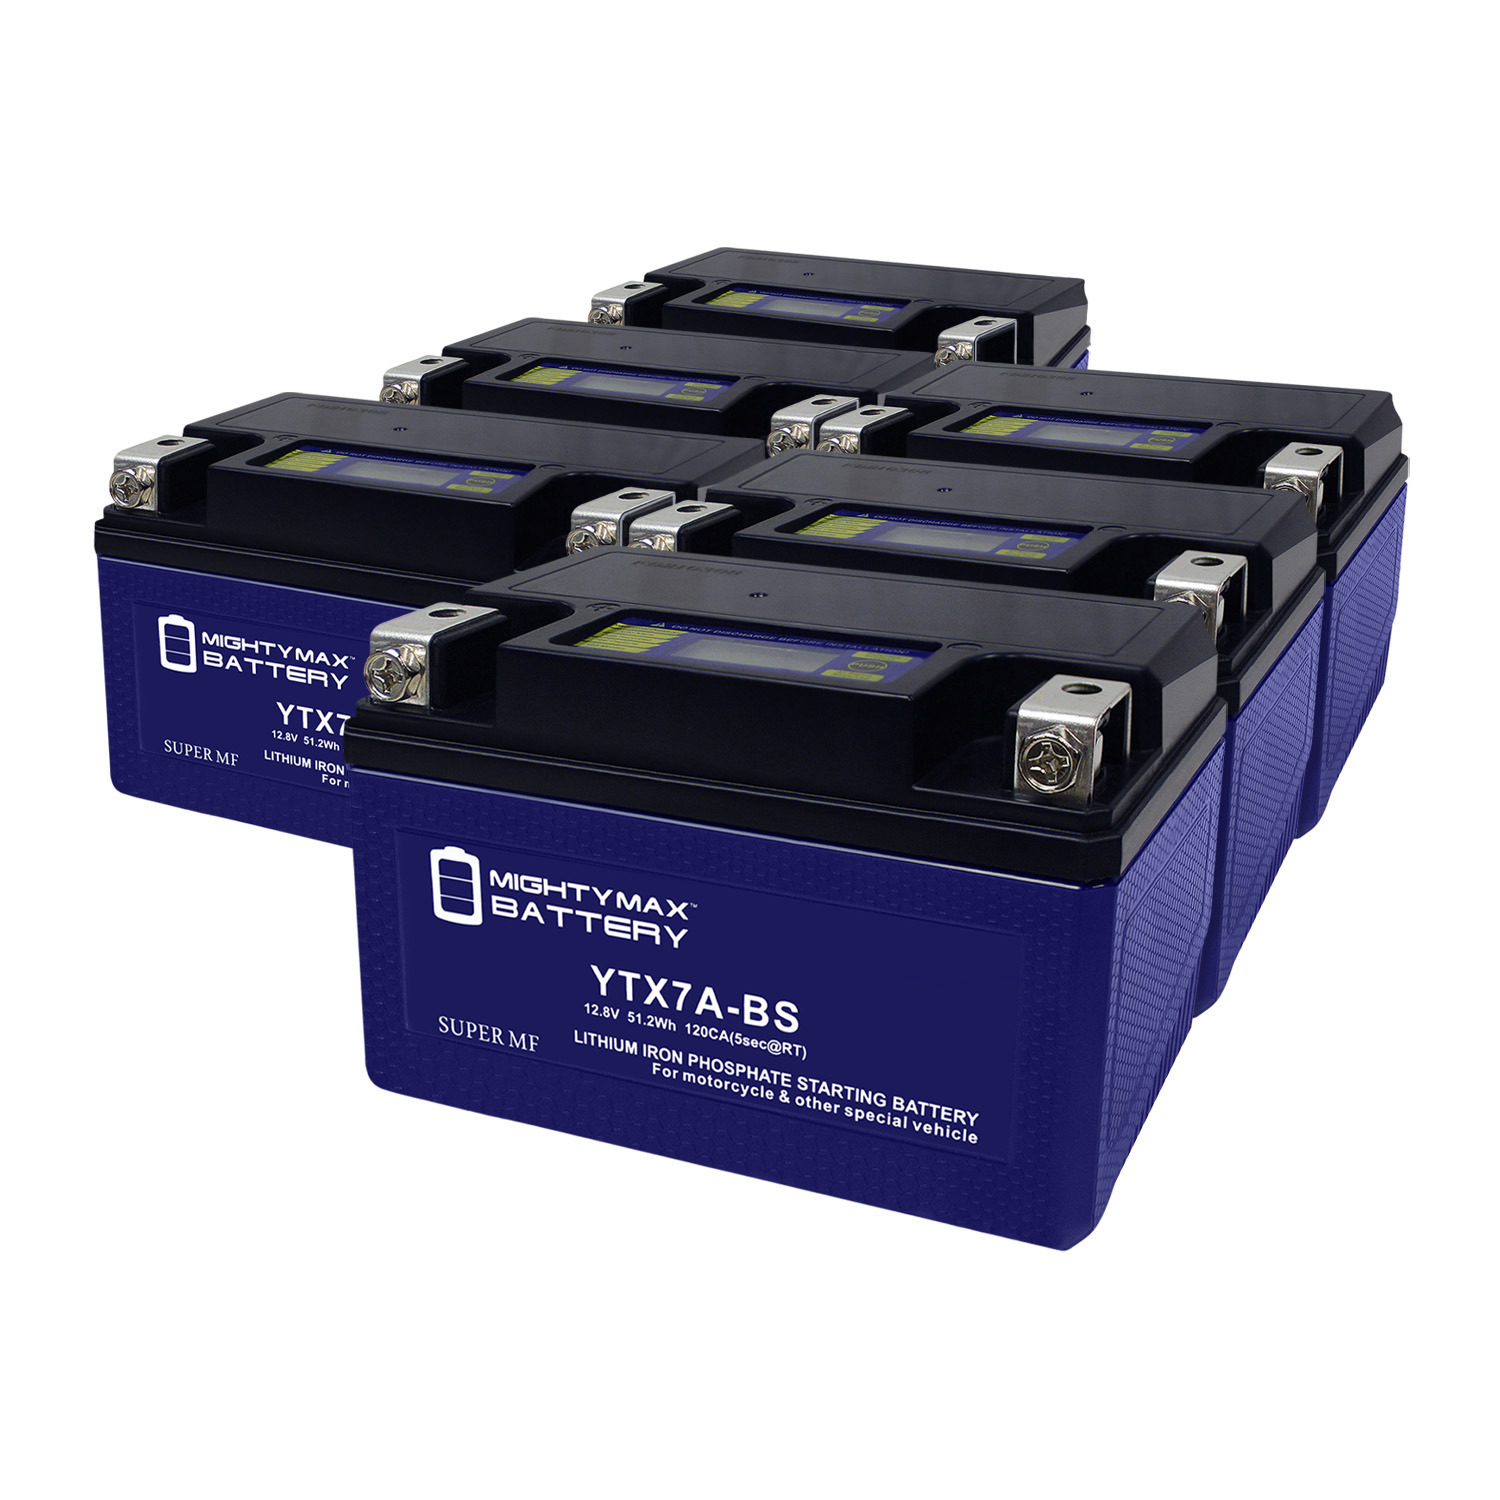 YTX7A-BS Lithium Replacement Battery Compatible with Interstate Yuasa Exide Deka Delco - 6 Pack